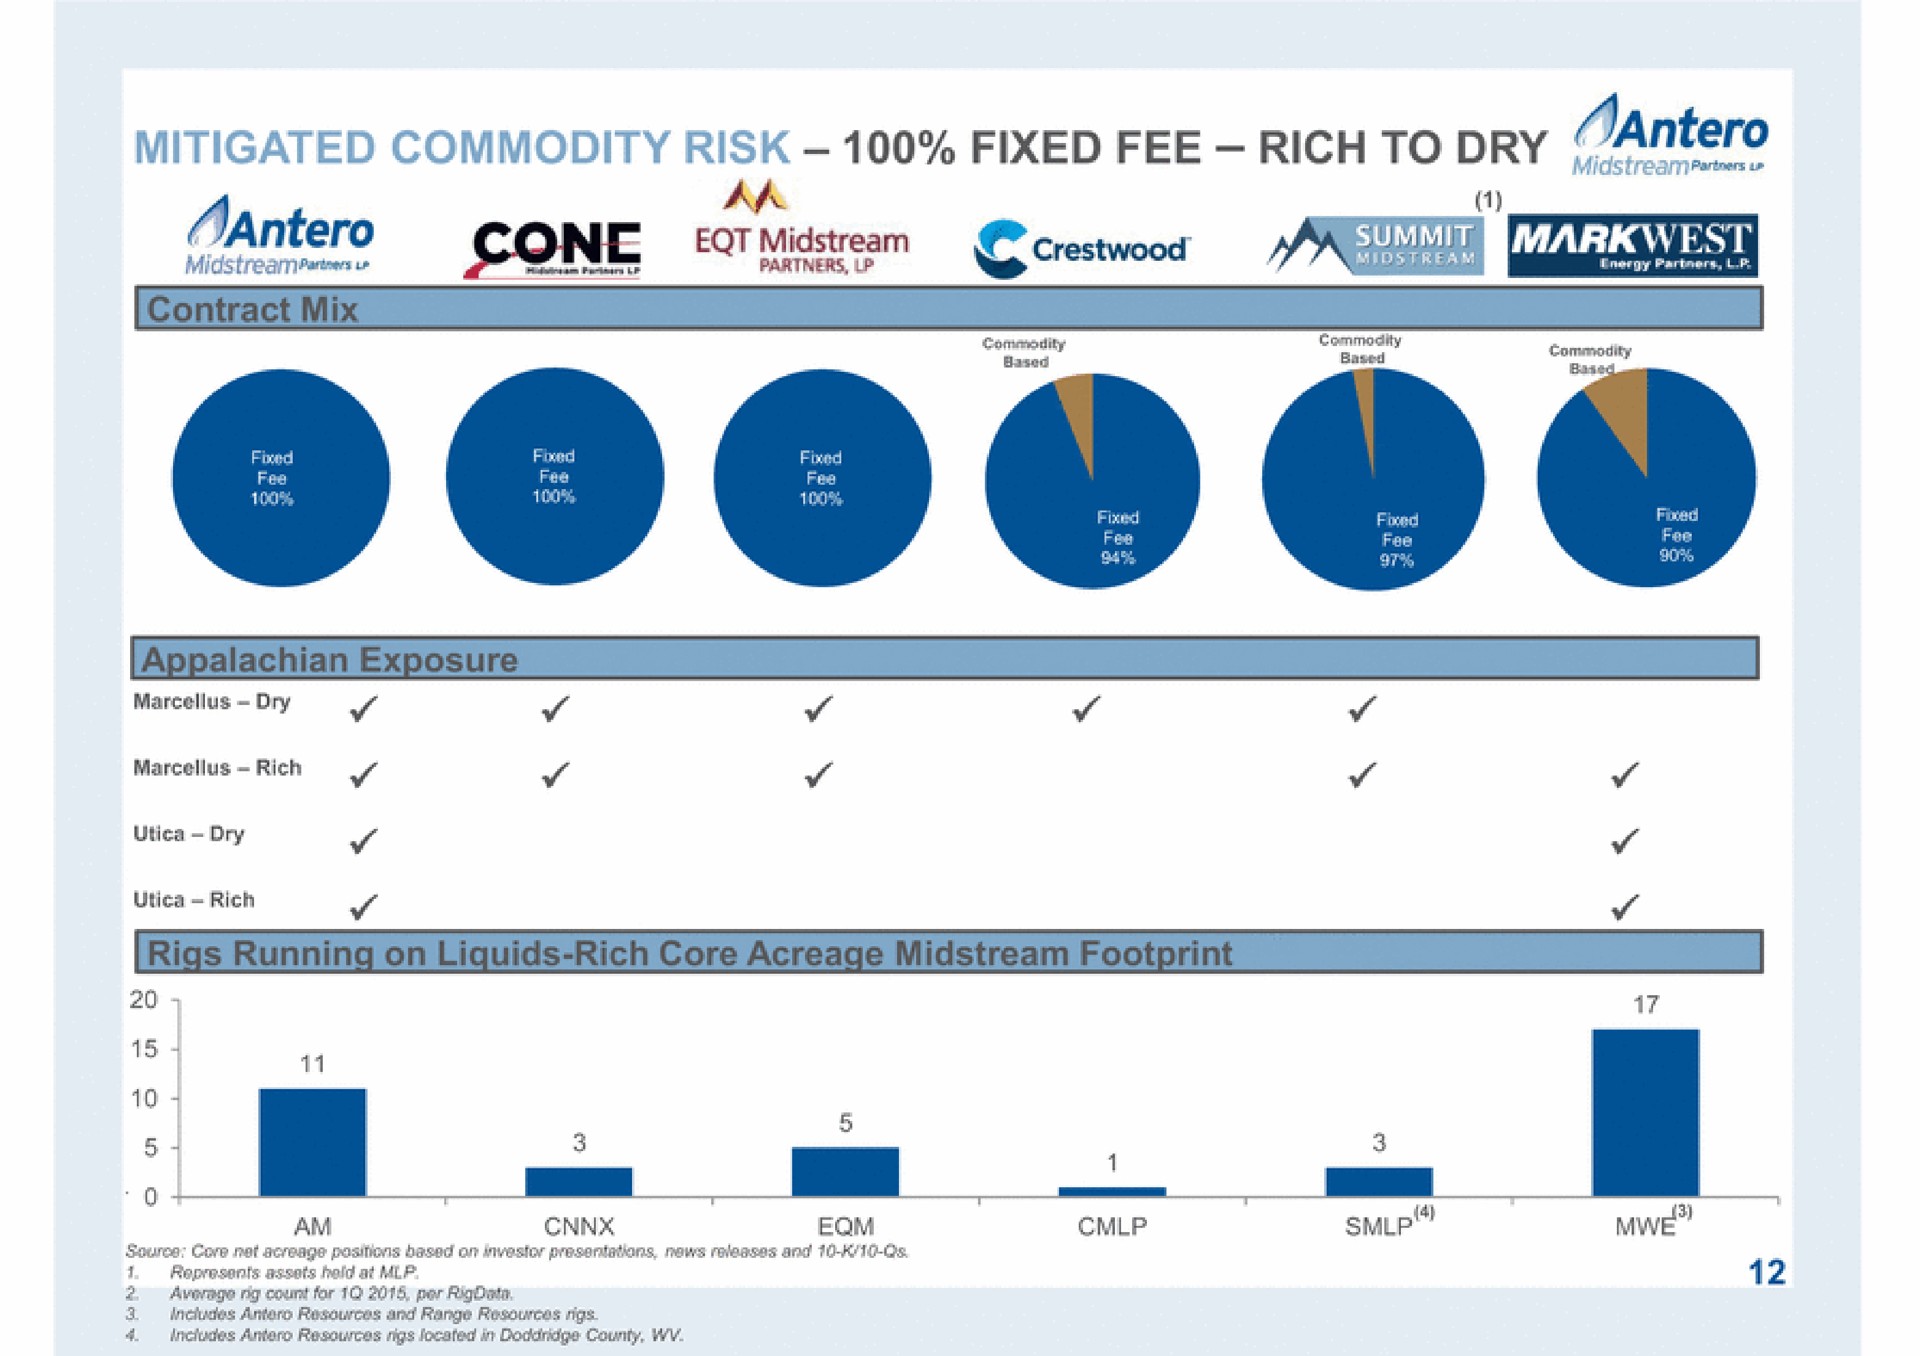 adds mitigated commodity risk fixed fee rich to dry am | Antero Midstream Partners